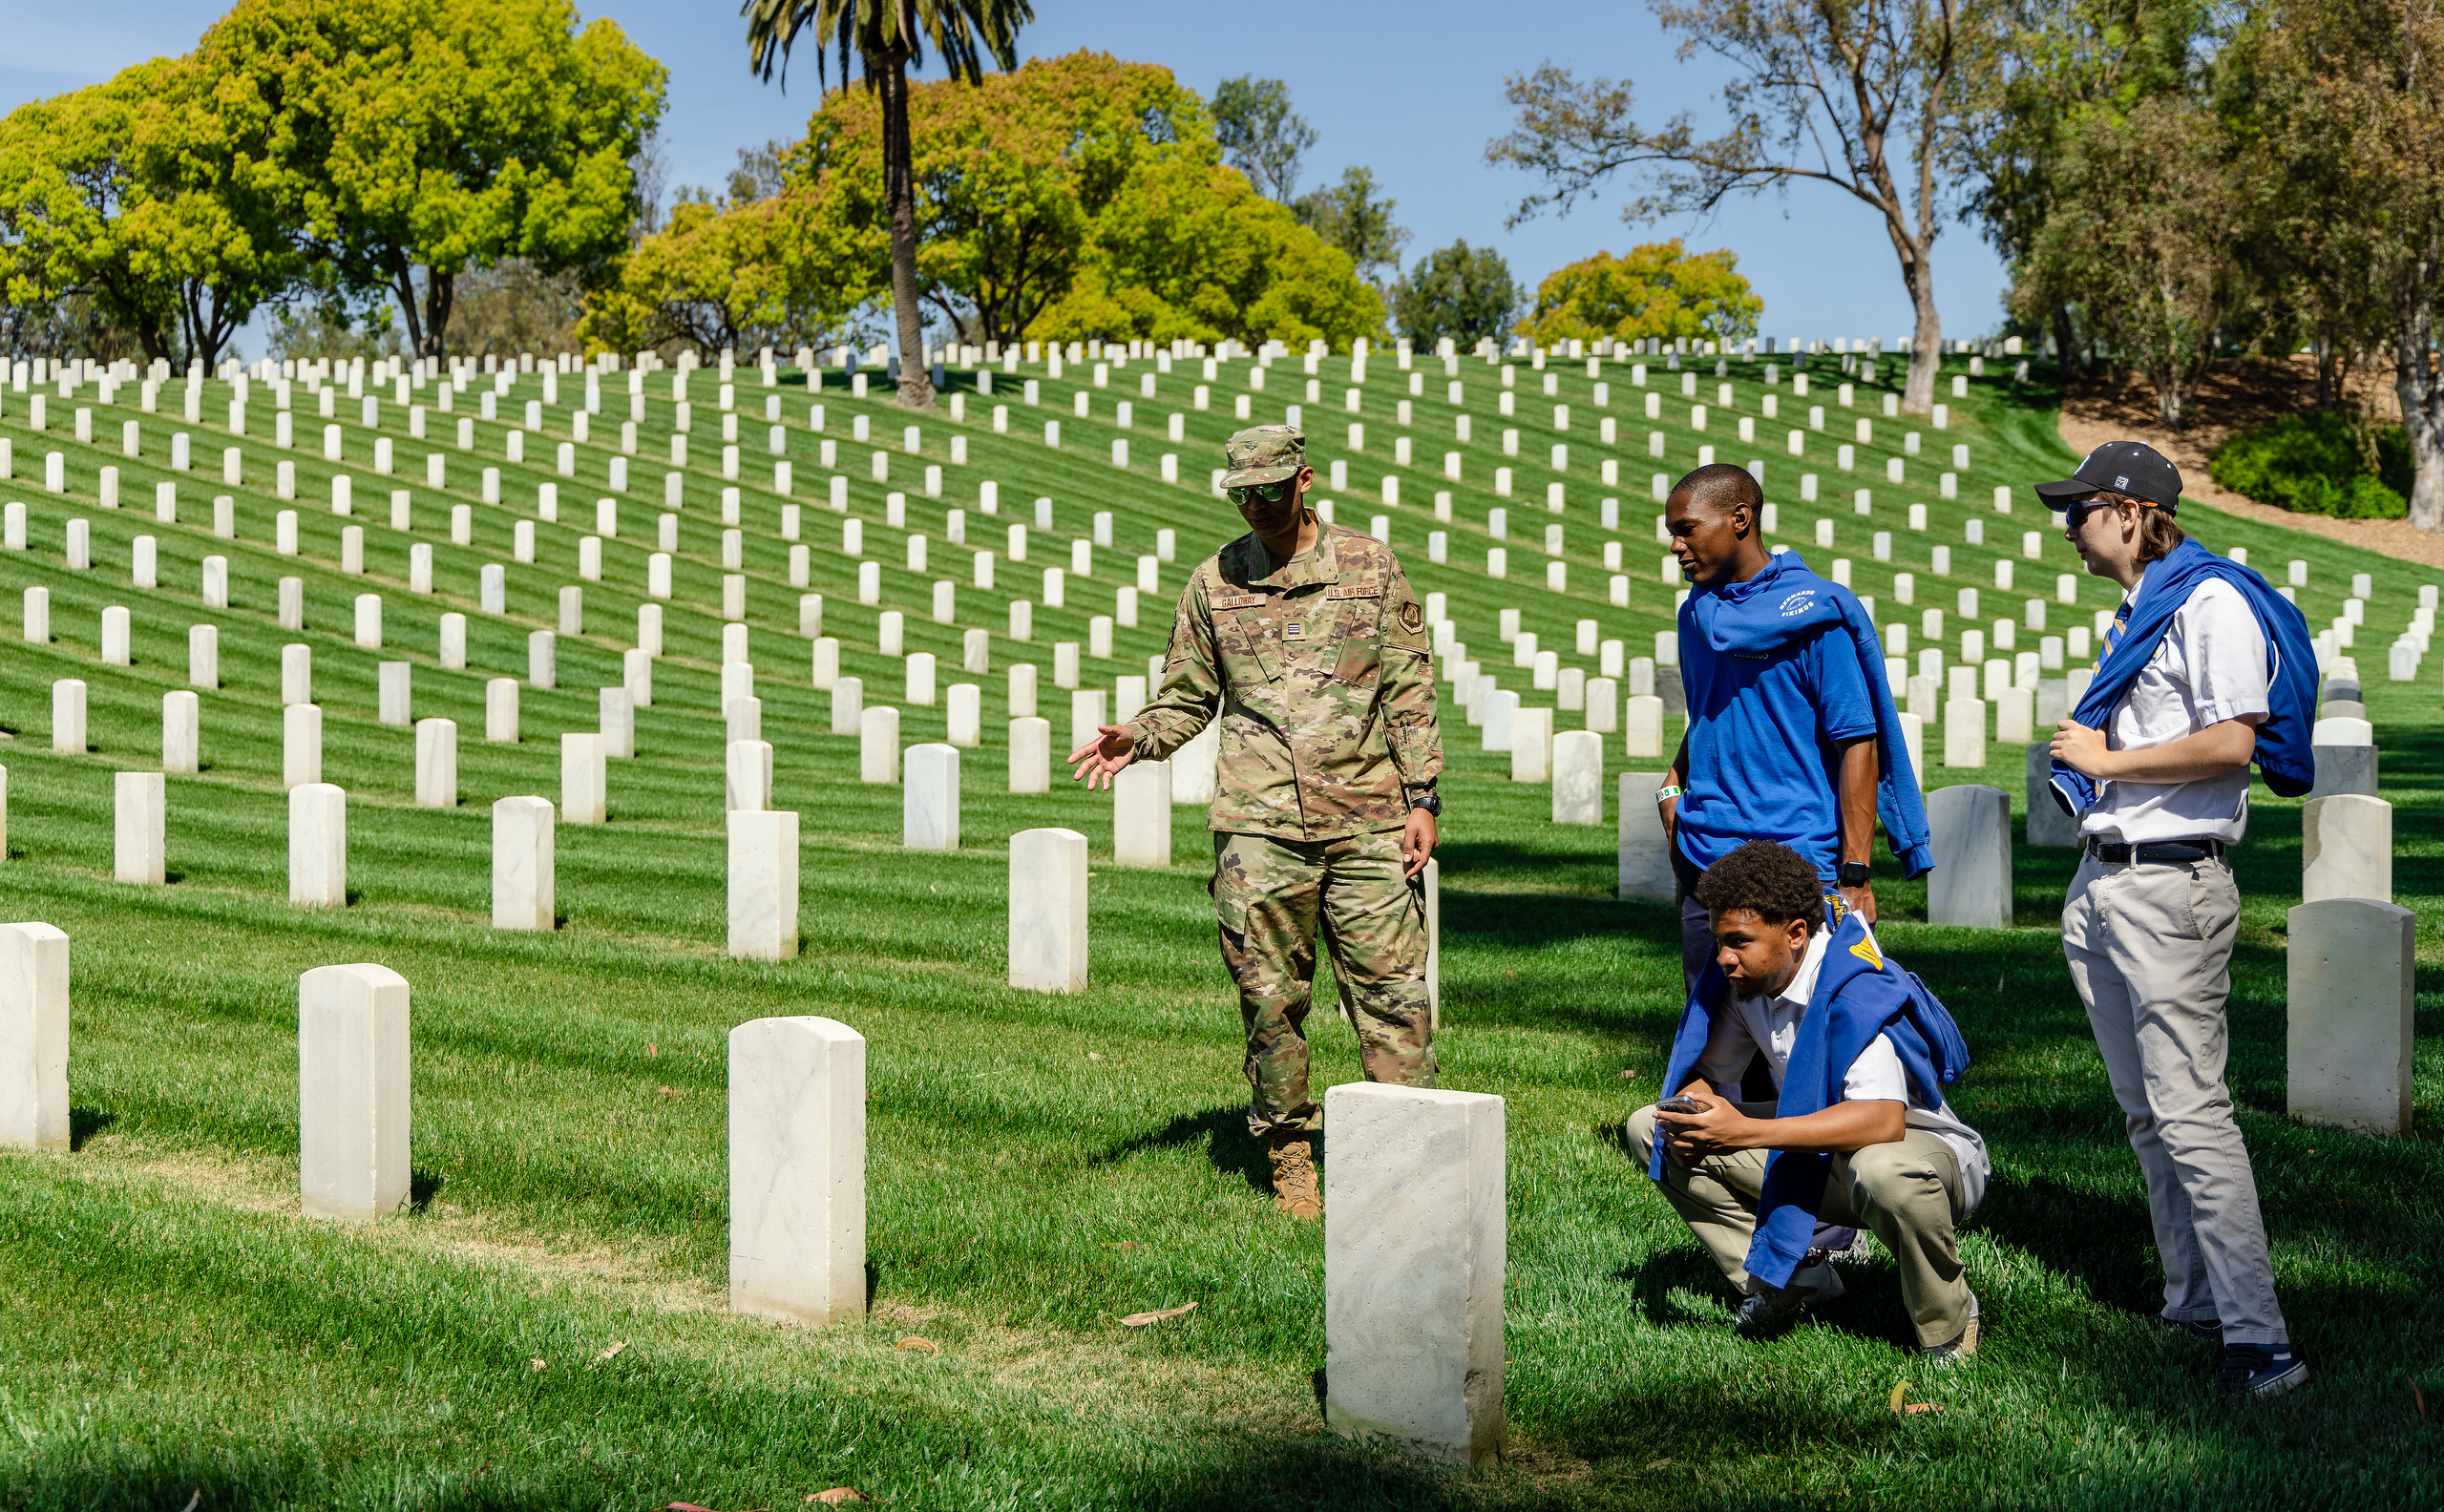 Students and a member of the US military on a field trip to the Los Angeles National Cemetery